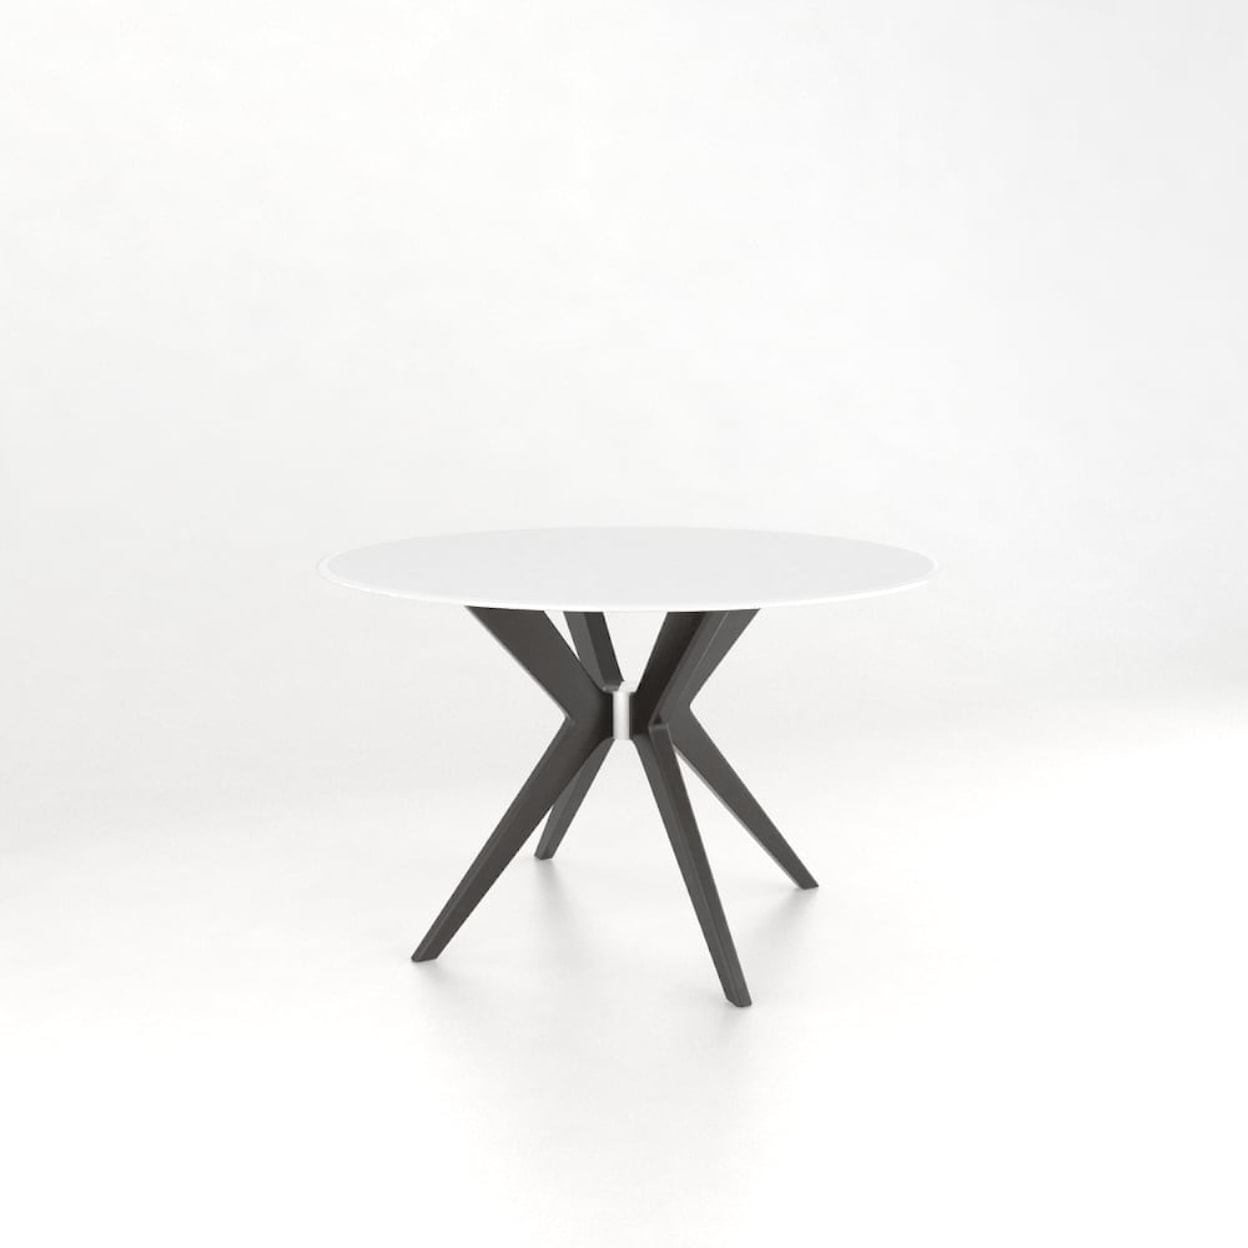 Canadel Downtown Customizable Dining Table